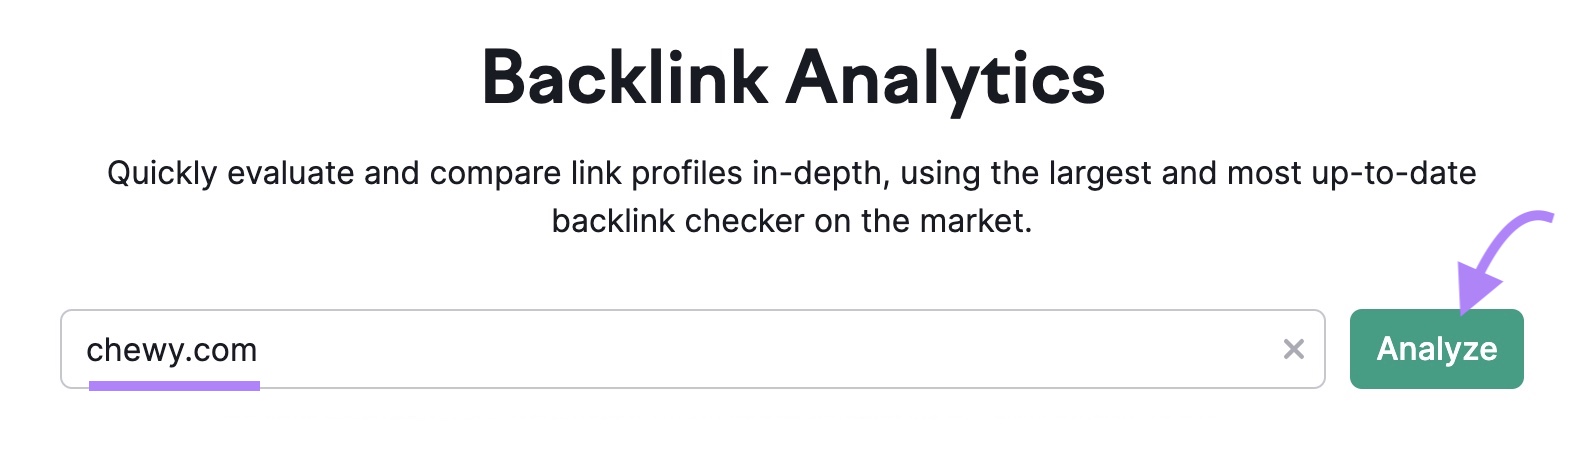 Backlink Analytics tool start with "chewy.com" entered as the domain and the "Analyze" button clicked.